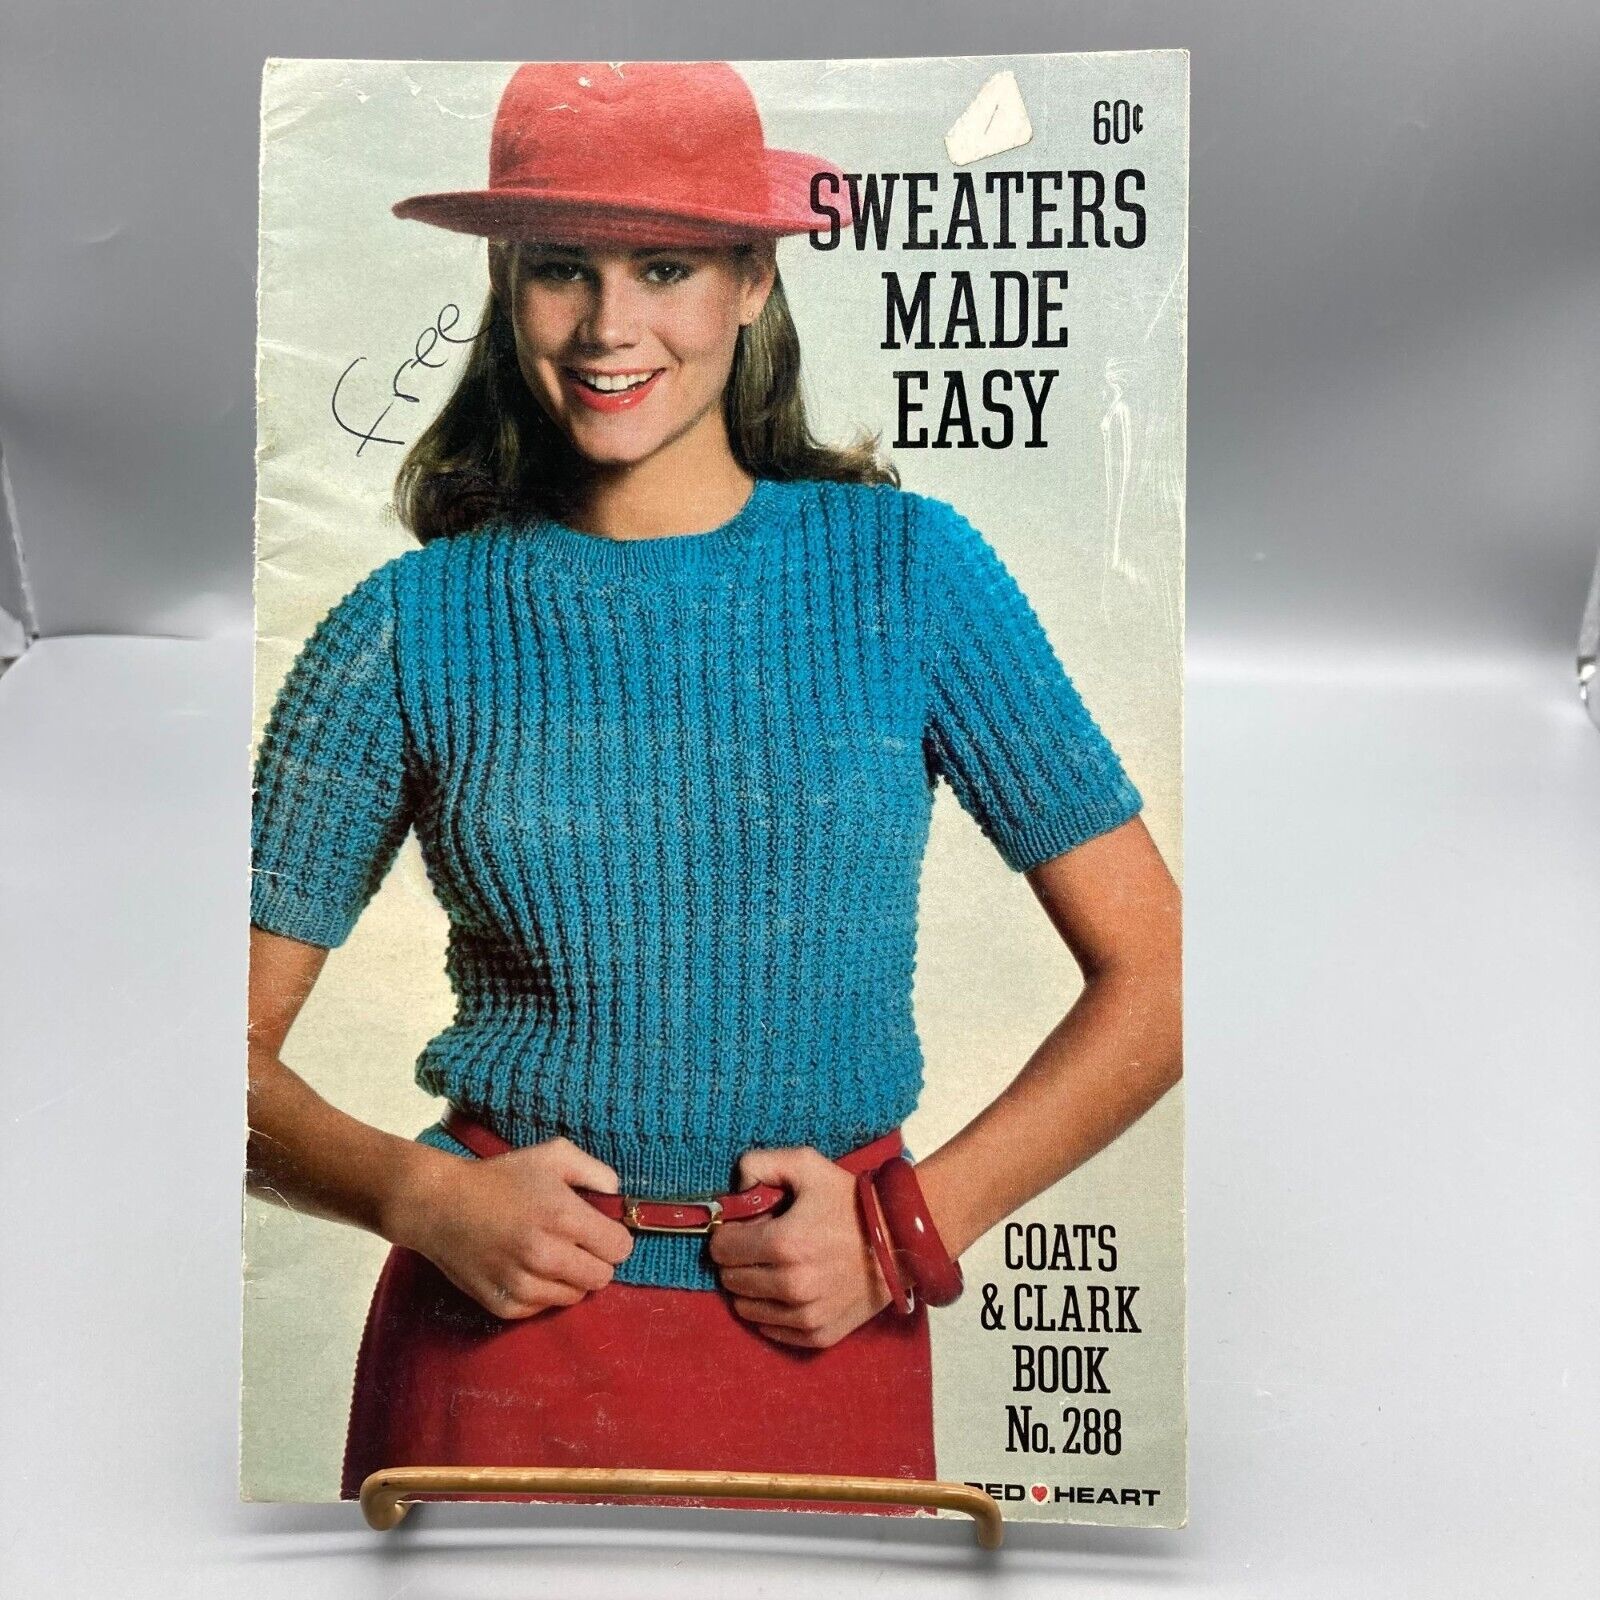 Vintage Coats and Clarks Book 288, Sweaters Made Easy Pattern Booklet for Knitte - $8.80